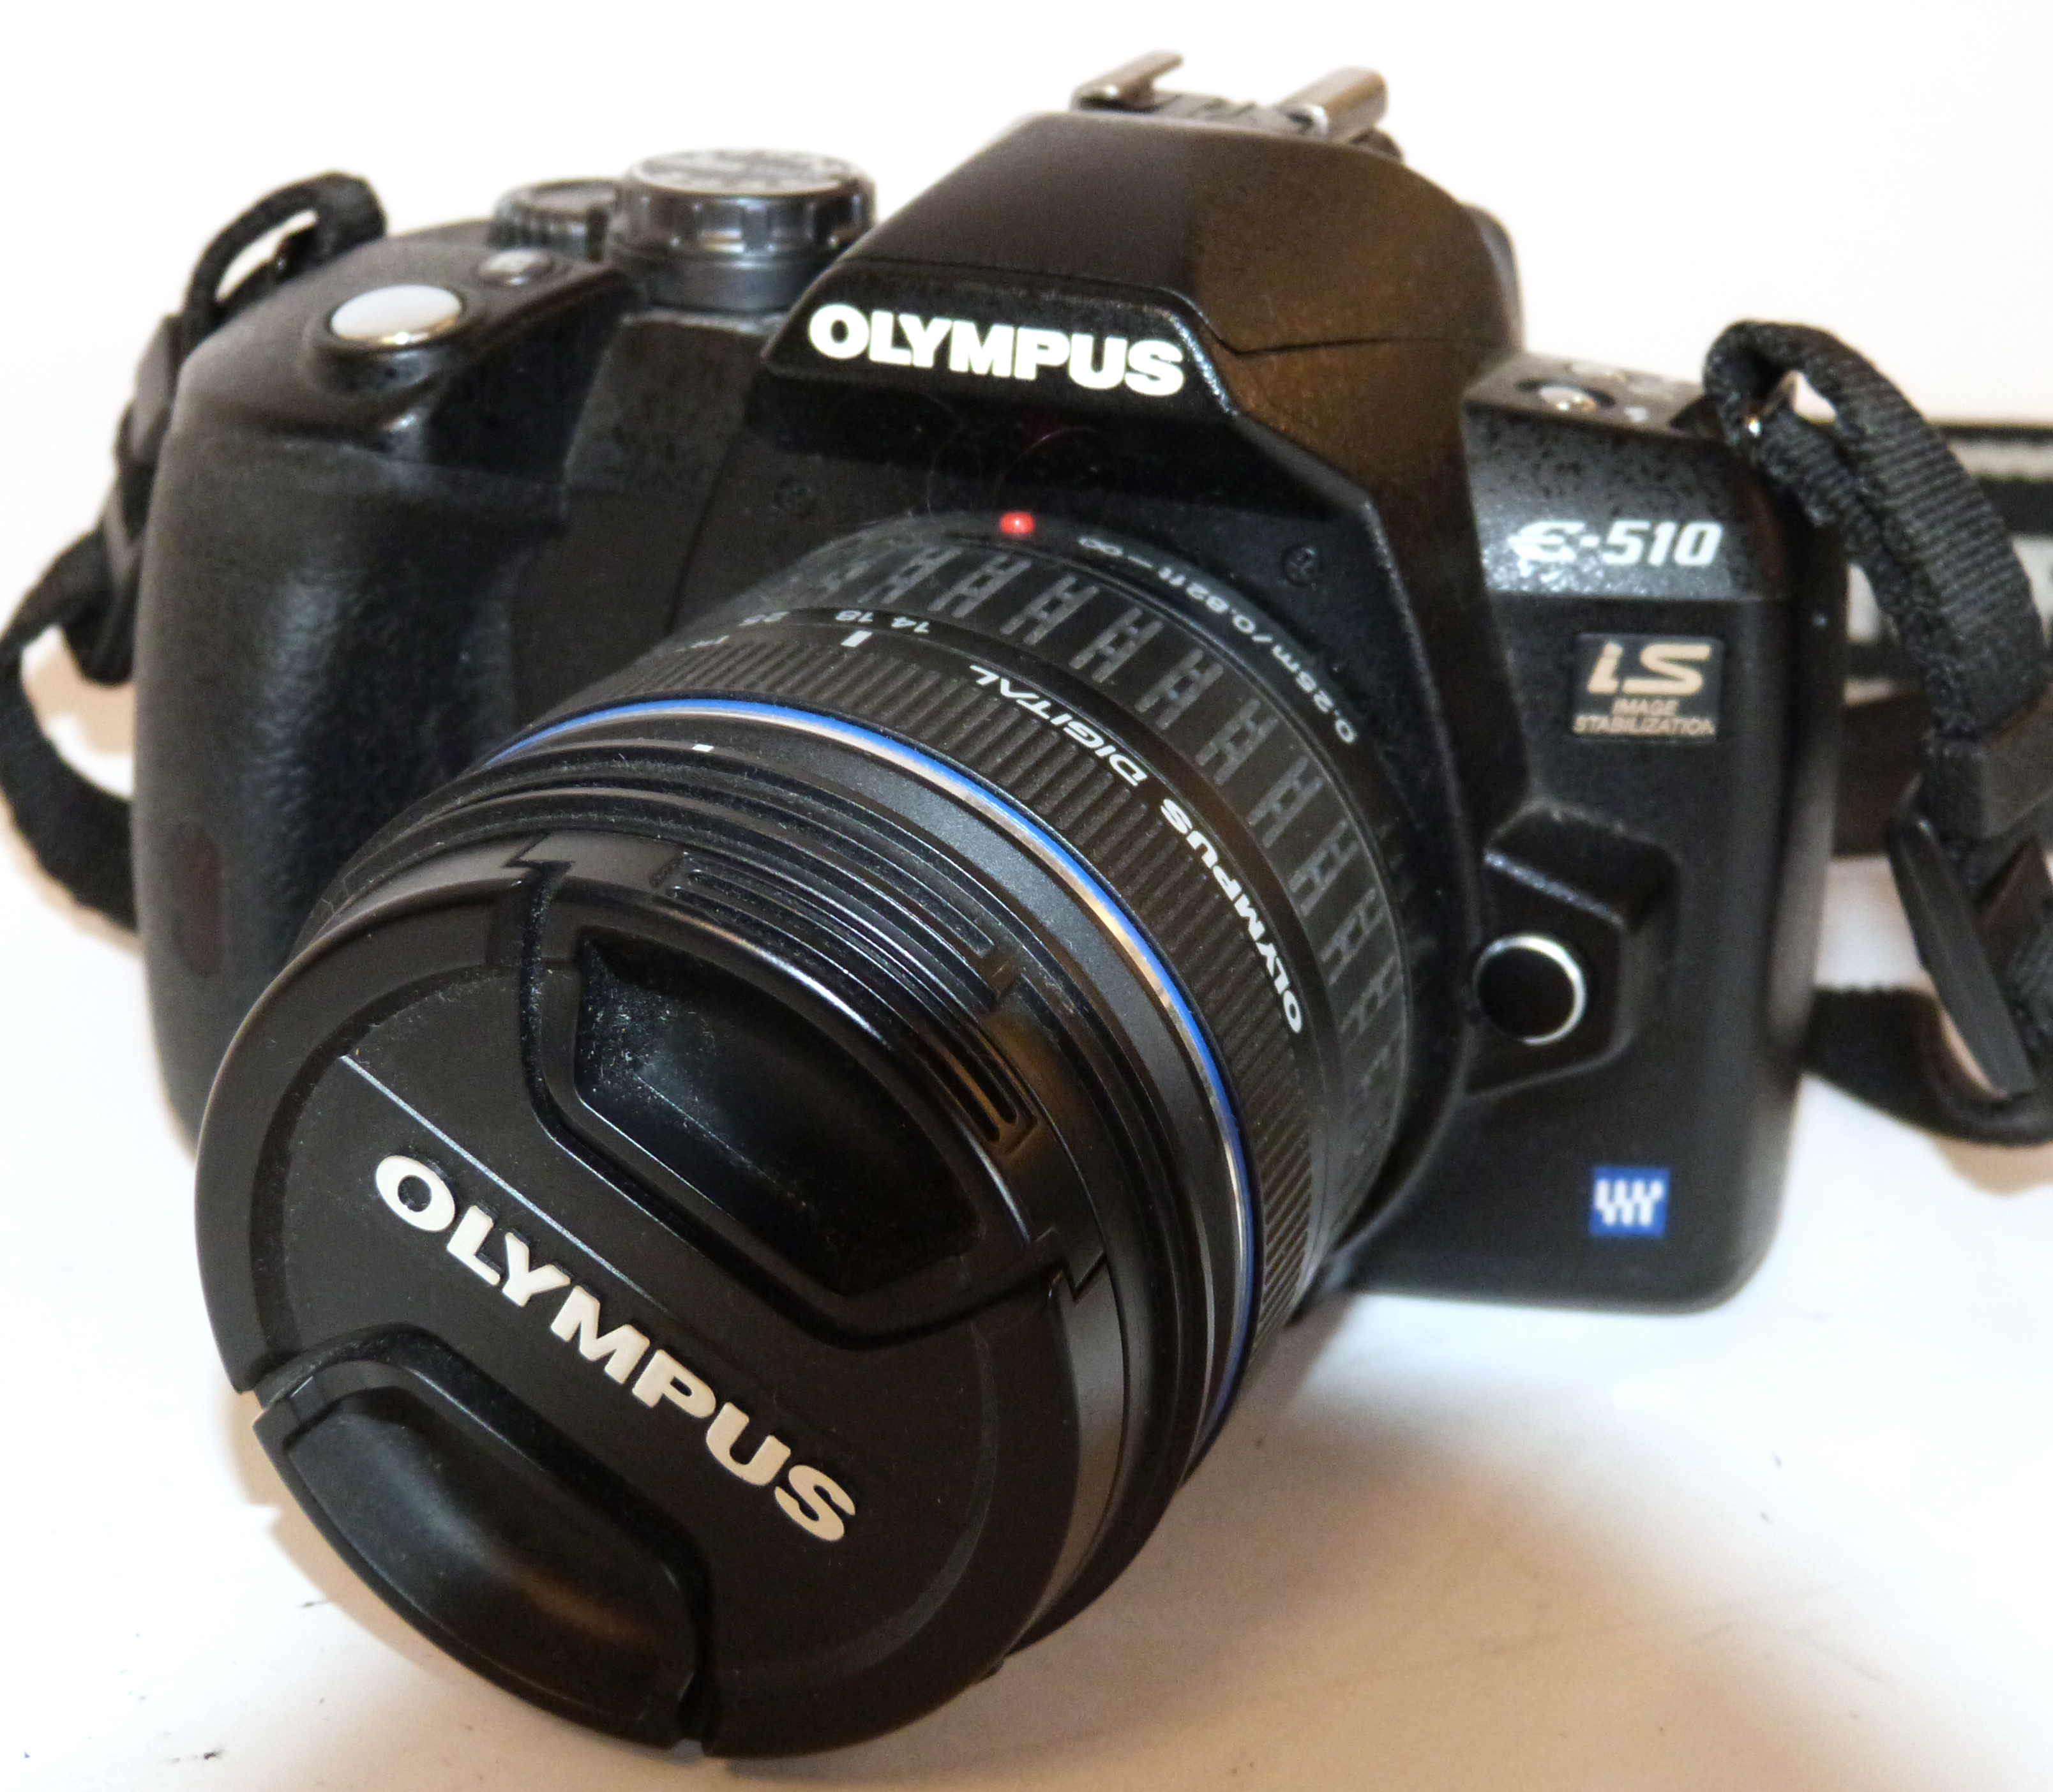 Olympus E-510 digital camera, together with Zuiko digital 14-42mm lens, charger and fitted case